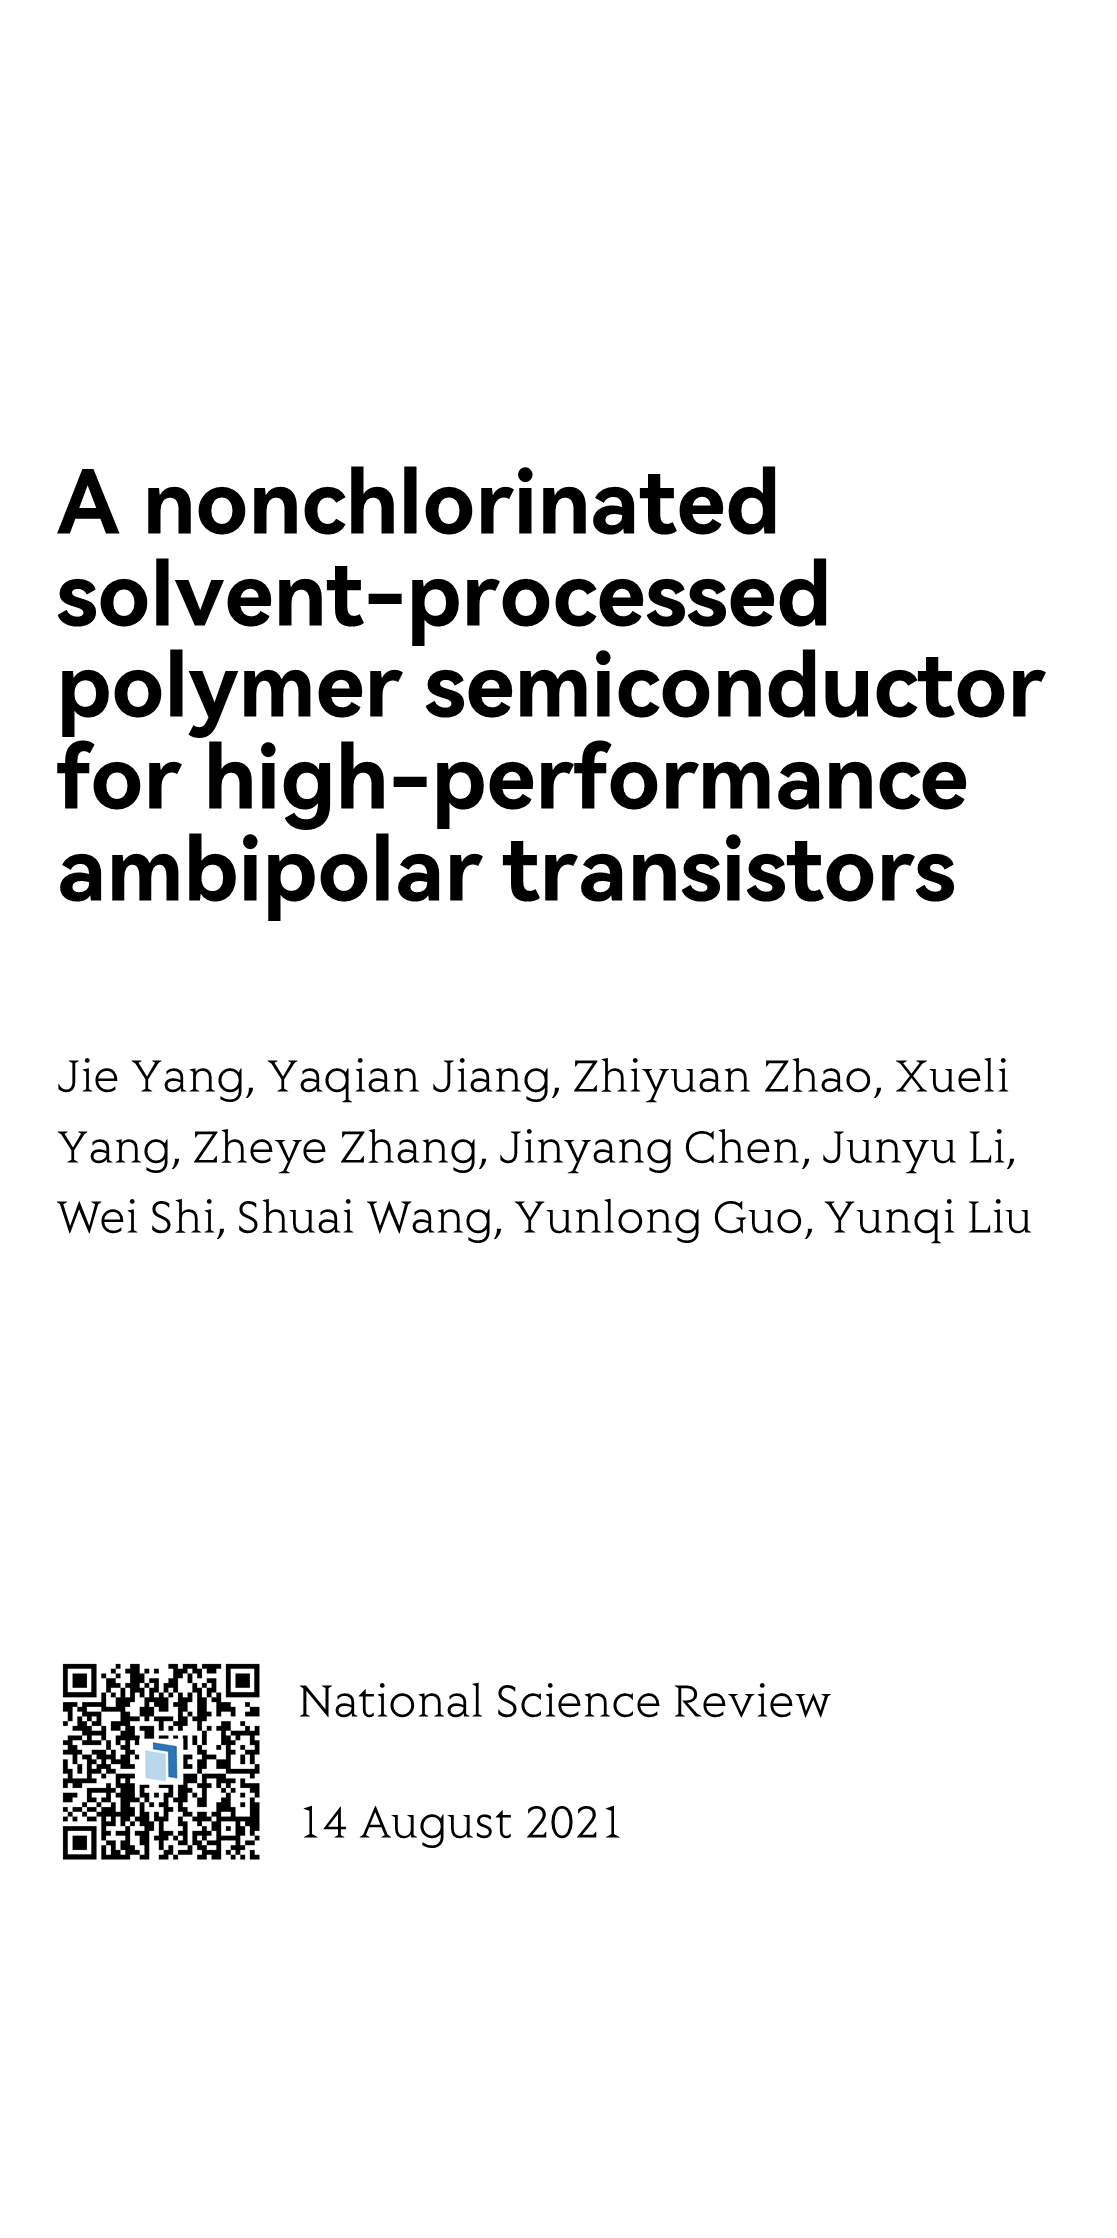 A nonchlorinated solvent-processed polymer semiconductor for high-performance ambipolar transistors_1